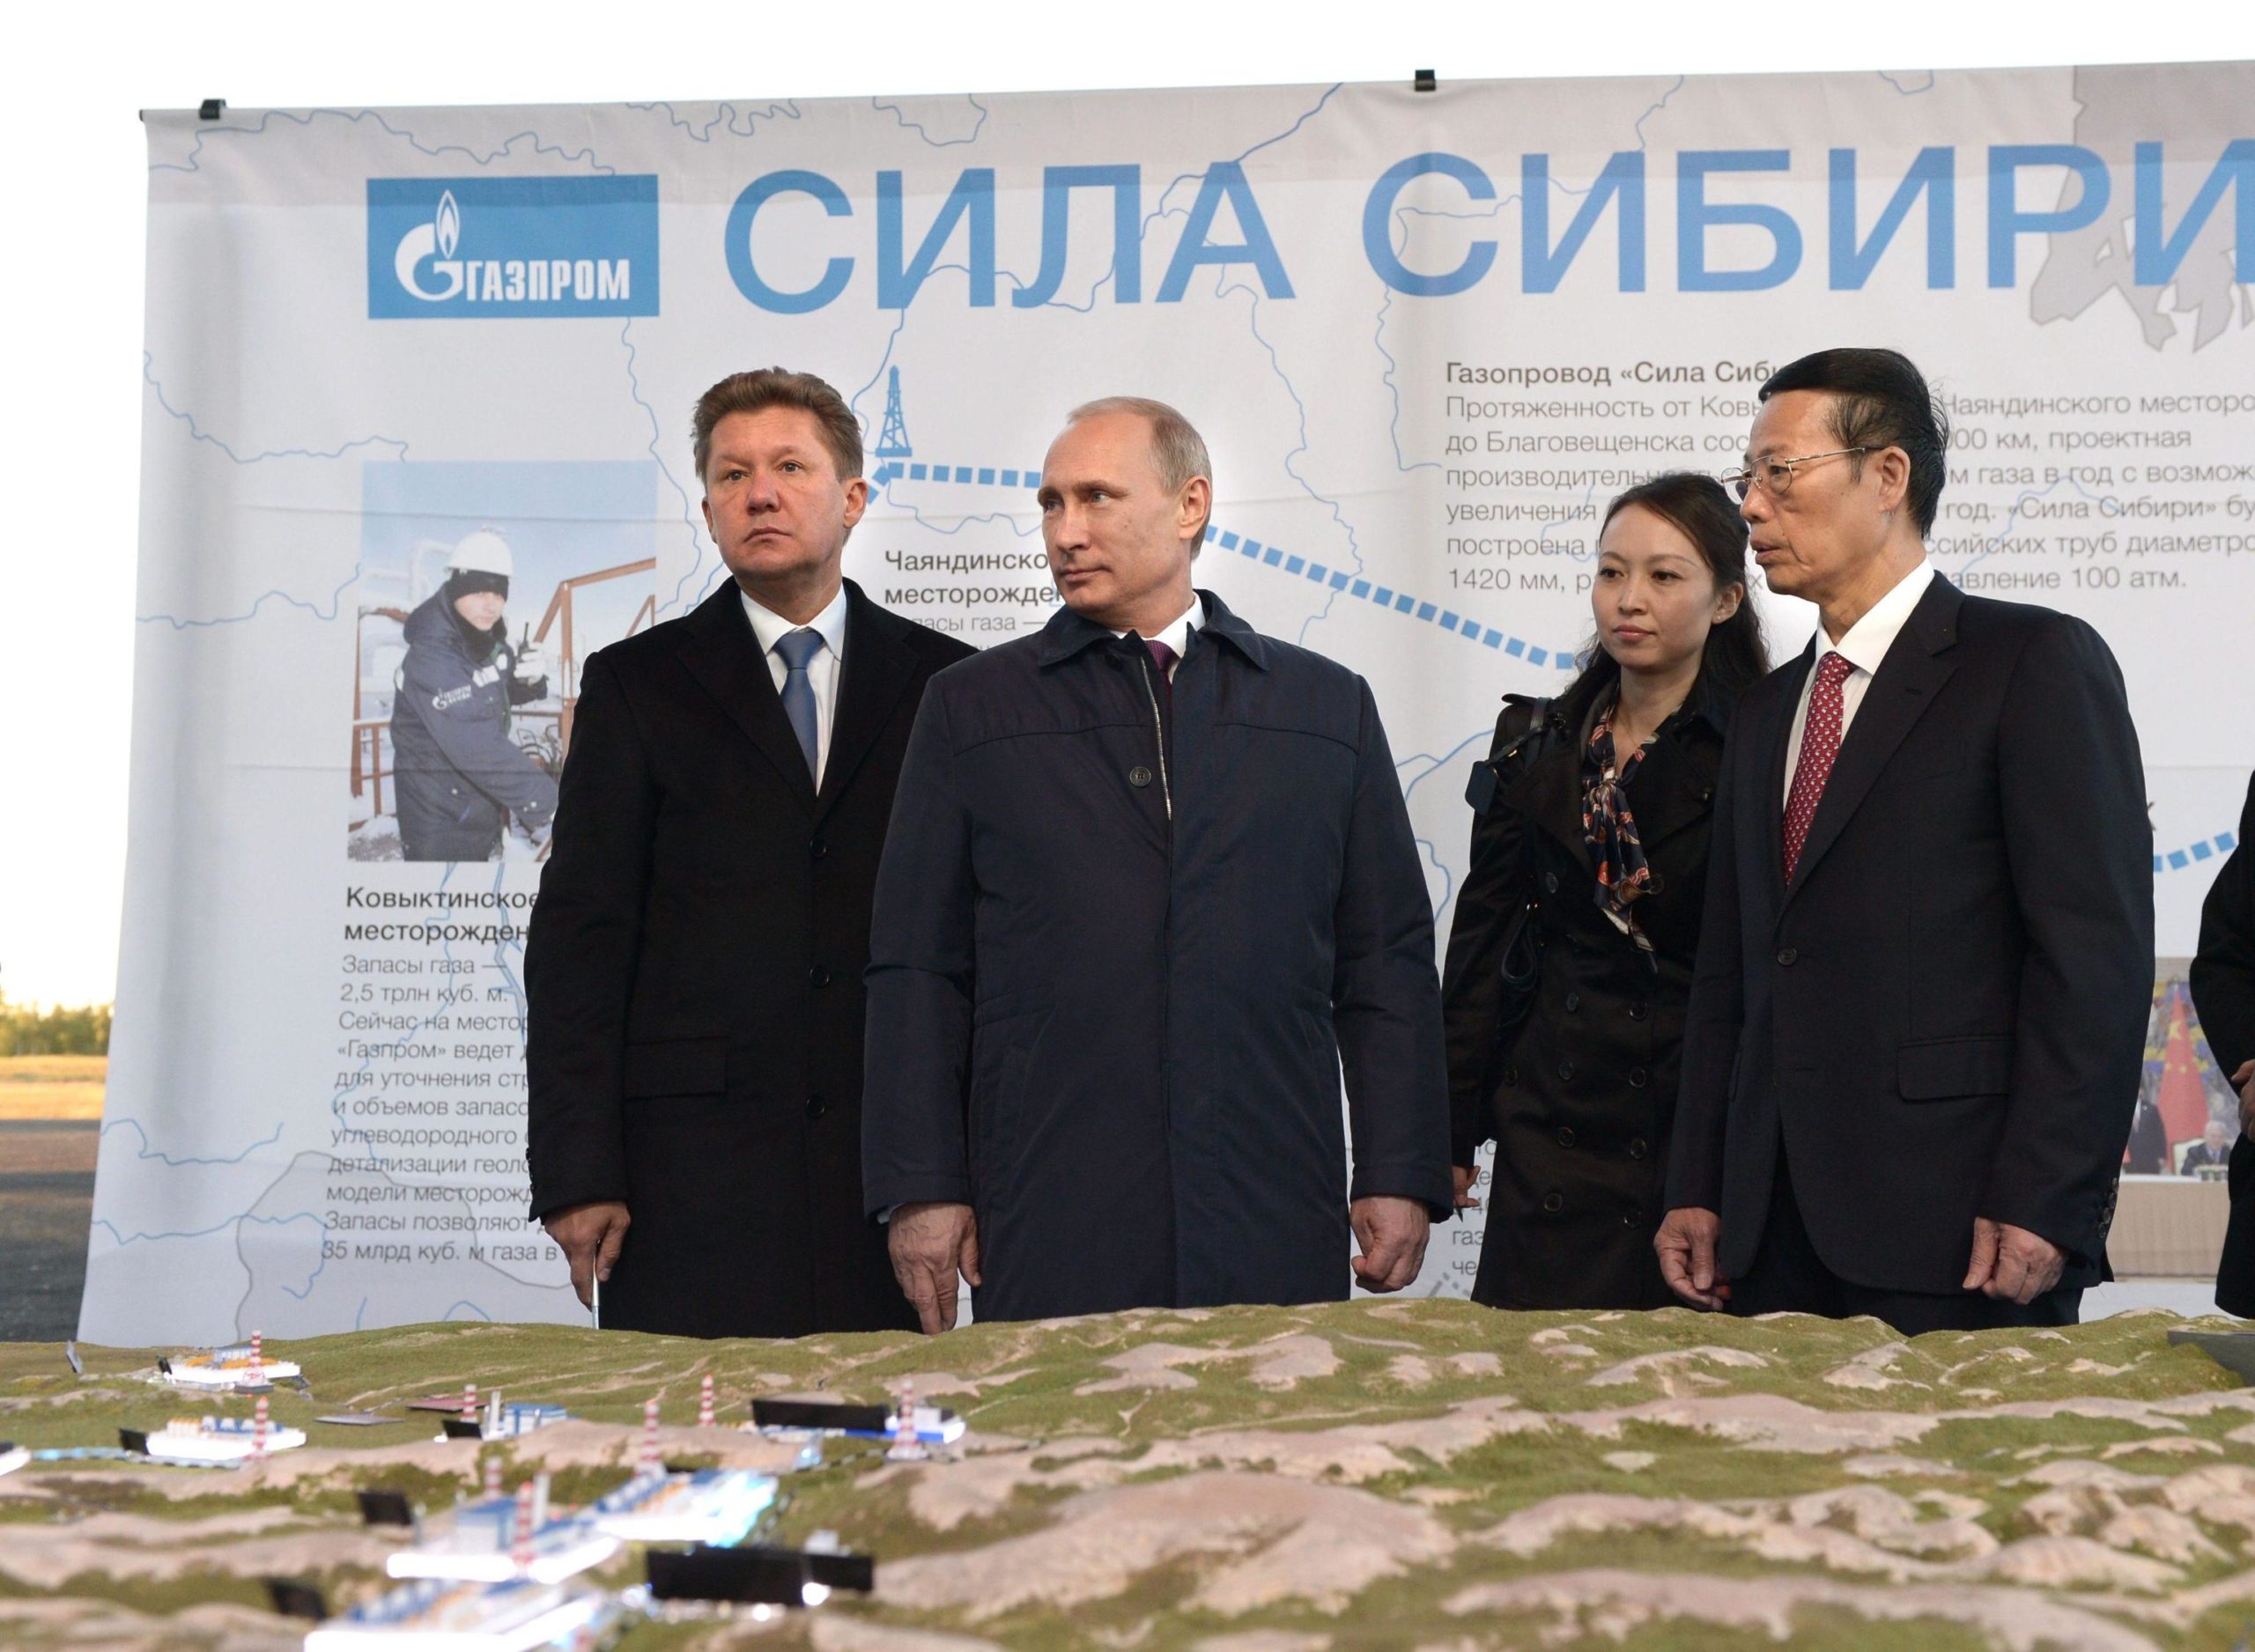 epa04379622 Russian President Vladimir Putin (2-L), Vice Premier of the People's Republic of China Zhang Gaoli (R) and  Gazprom President and CEO Alexei Miller (L) attend the ceremony marking the joining of the first link in the Power of Siberia main gas pipeline, held at Namsky Highway near Us Khatyn village, Republic of Yakutia, Russia, 01 September 2014.  EPA/ALEXEY NIKOLSKY /RIA NOVOSTI / KREMLIN POOL MANDATORY CREDIT